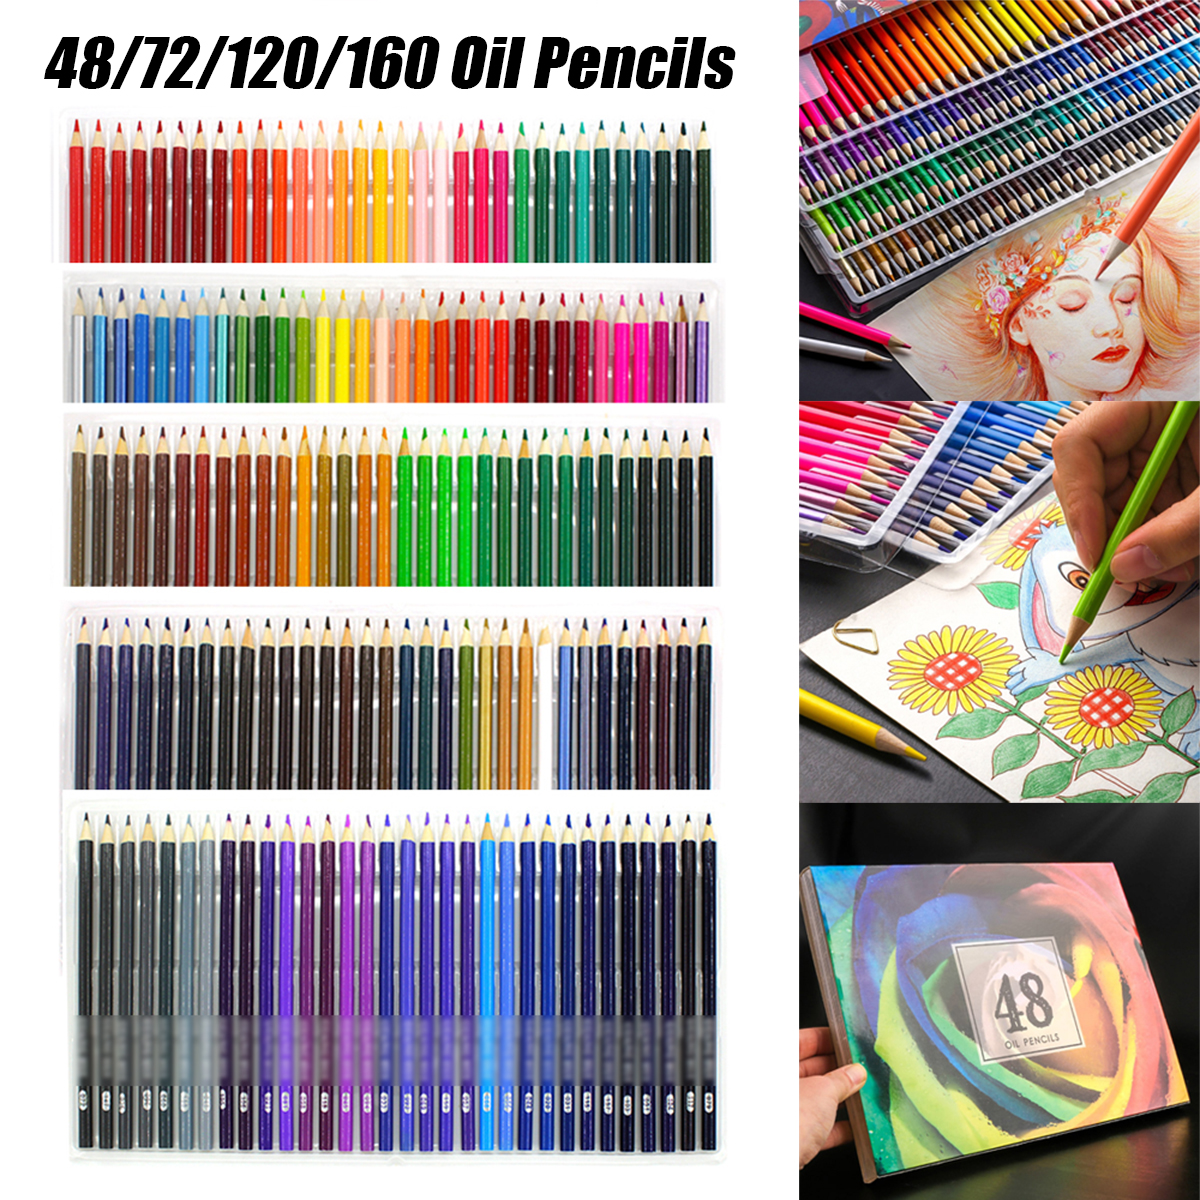 Colors Pencils Set of 48/72/120/160 Pre-Sharpened Nontoxic Art Supplies for Kids and Adults Professional Oil Colored Artist Painting Sketching Wood Stationery School Art Supplies